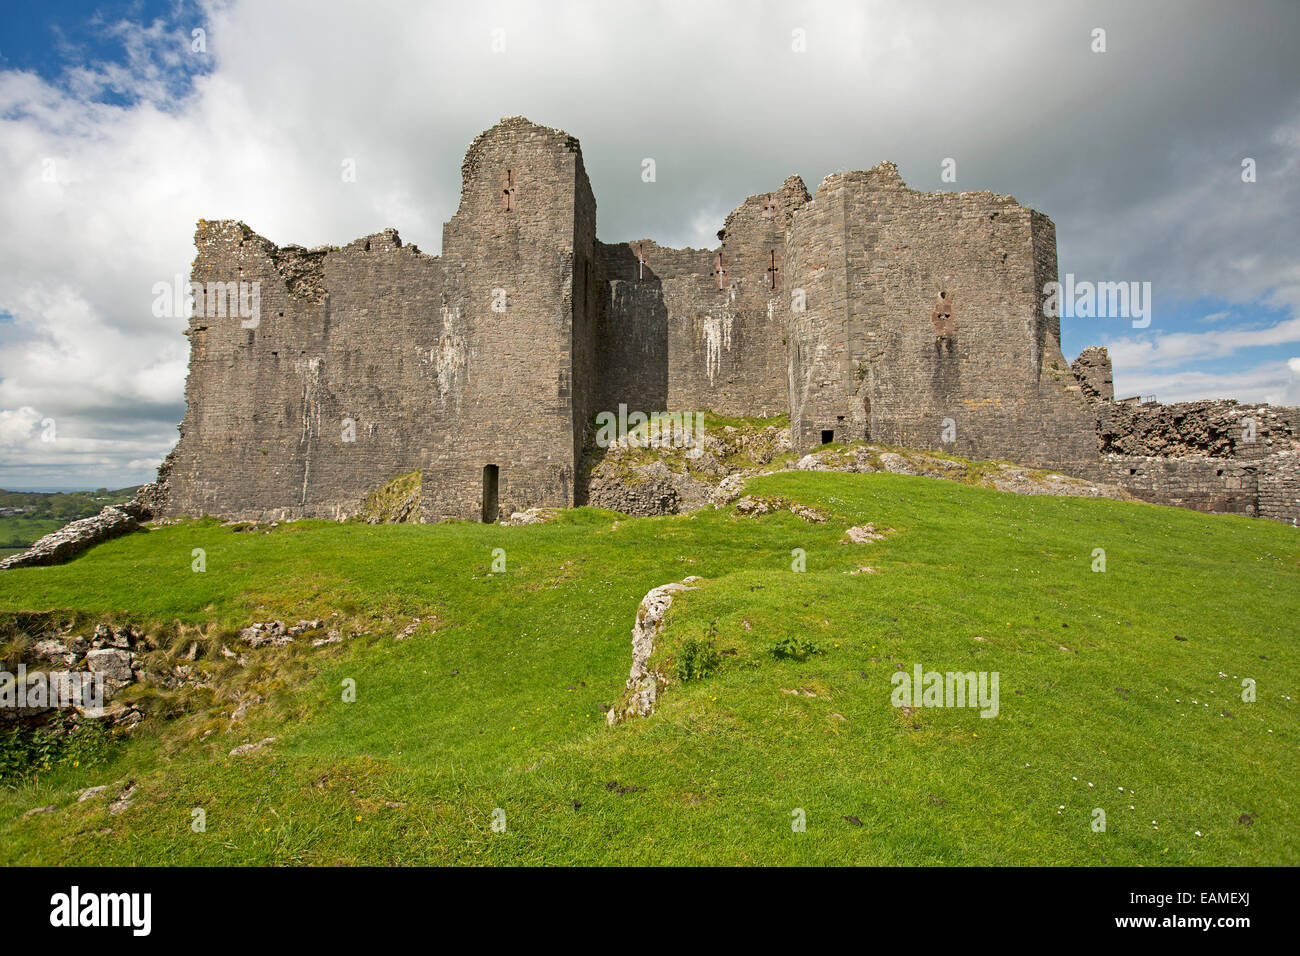 View of  spectacular ruins of 12th century Carrig Cennen castle on hilltop cloaked with emerald grass & under blue sky in Wales Stock Photo